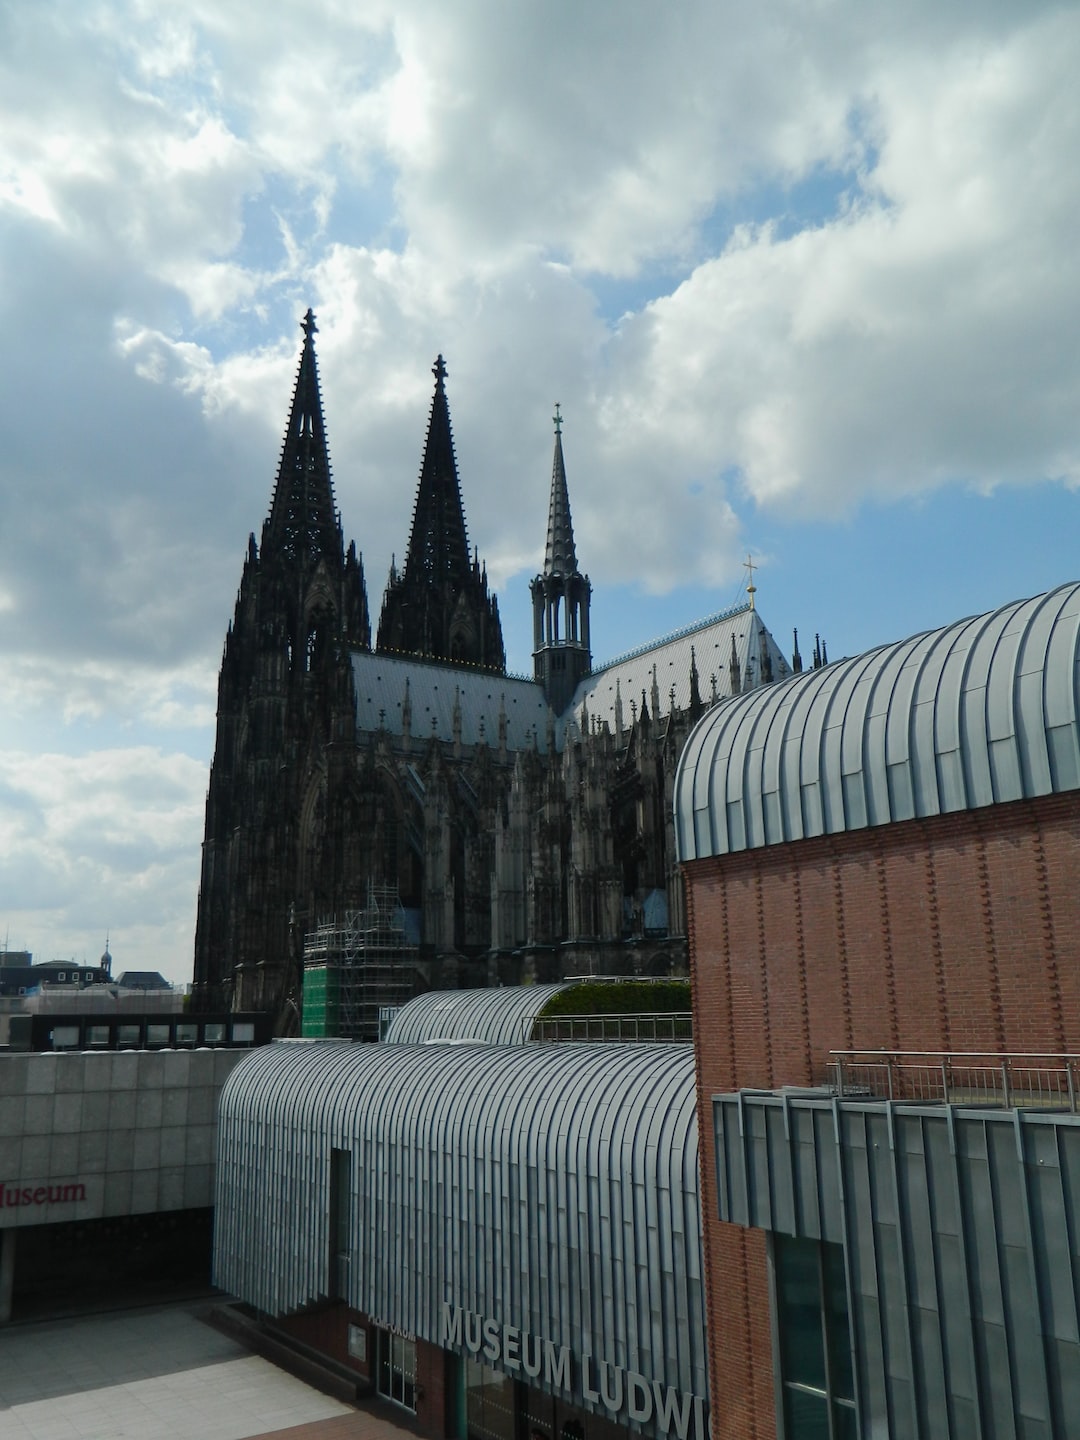 Stunningly beautiful Cologne Cathedral.